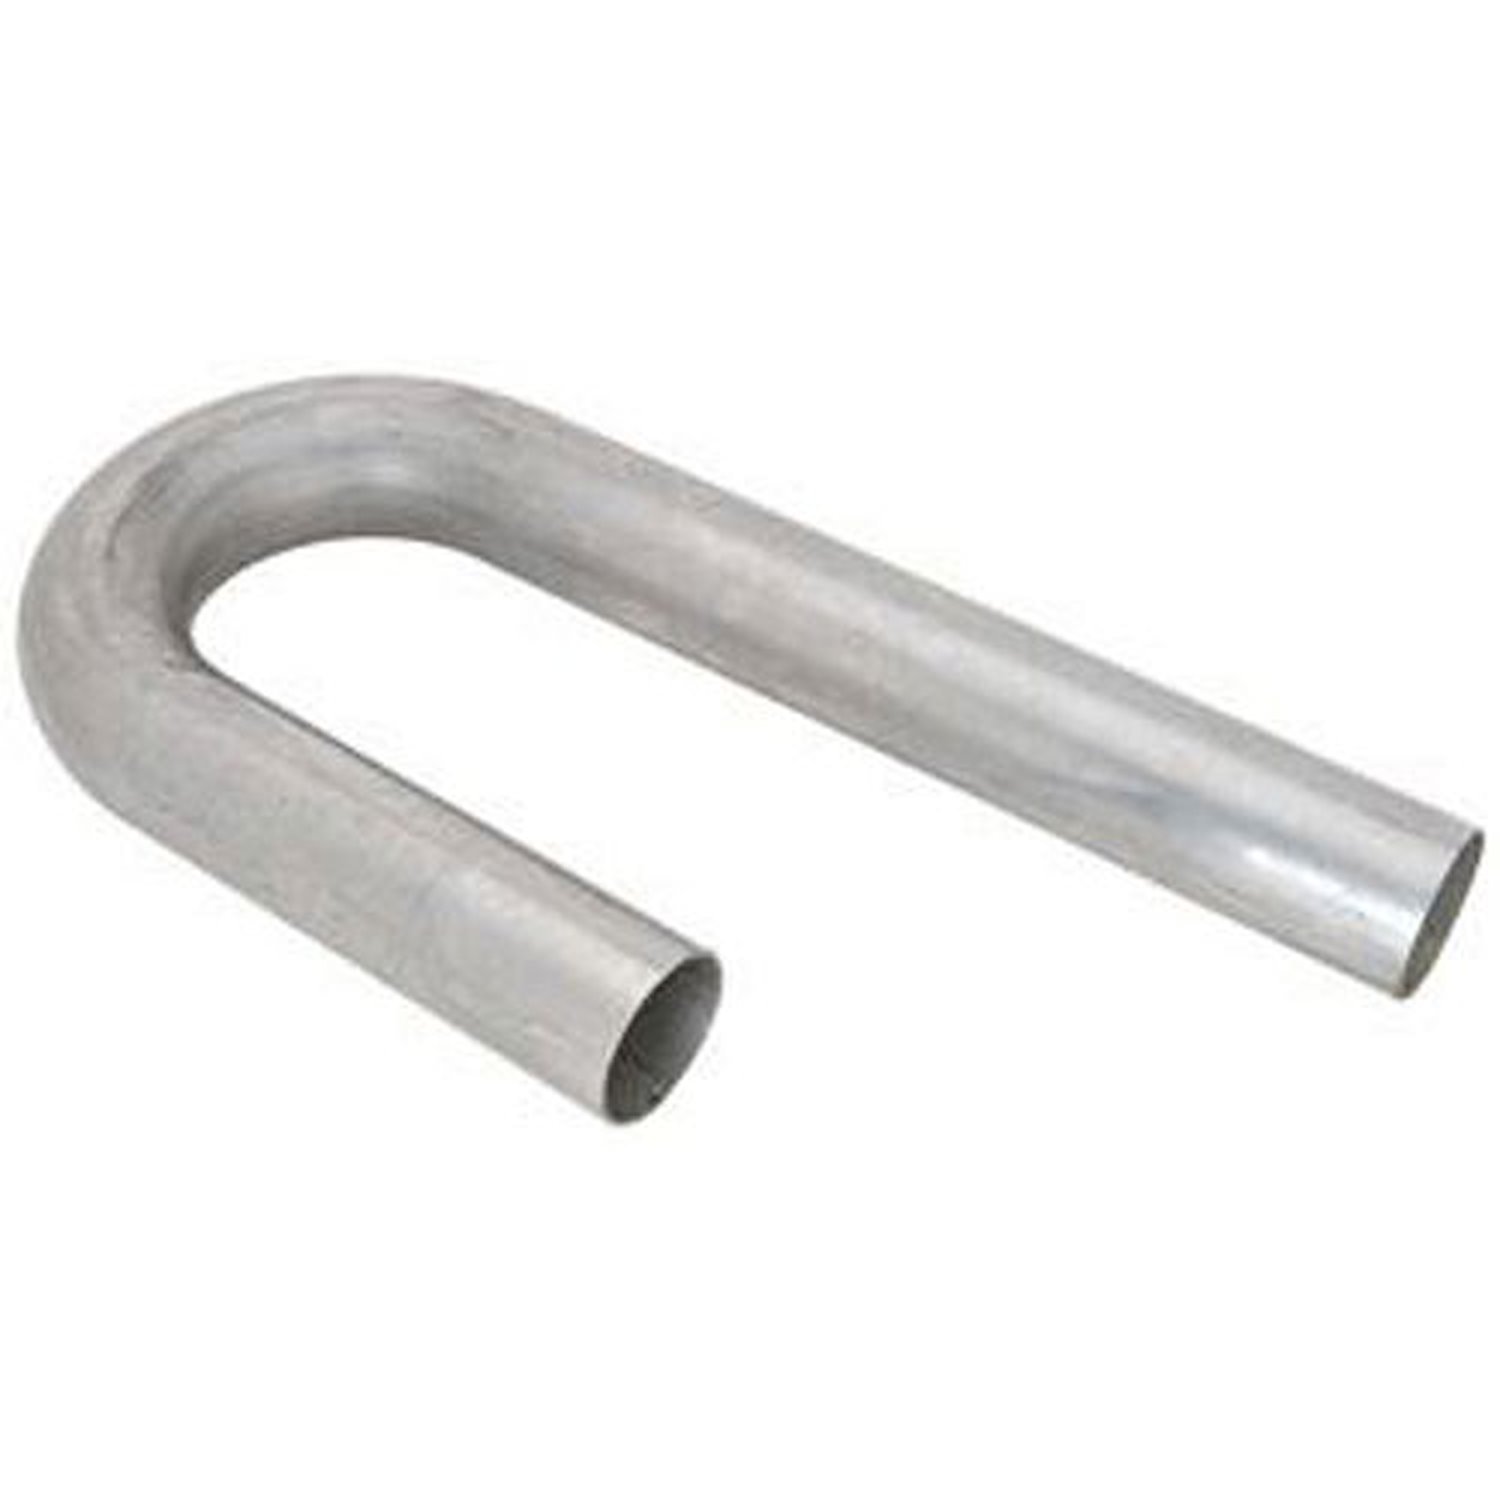 Stainless Steel 3-1/2" J-Bend